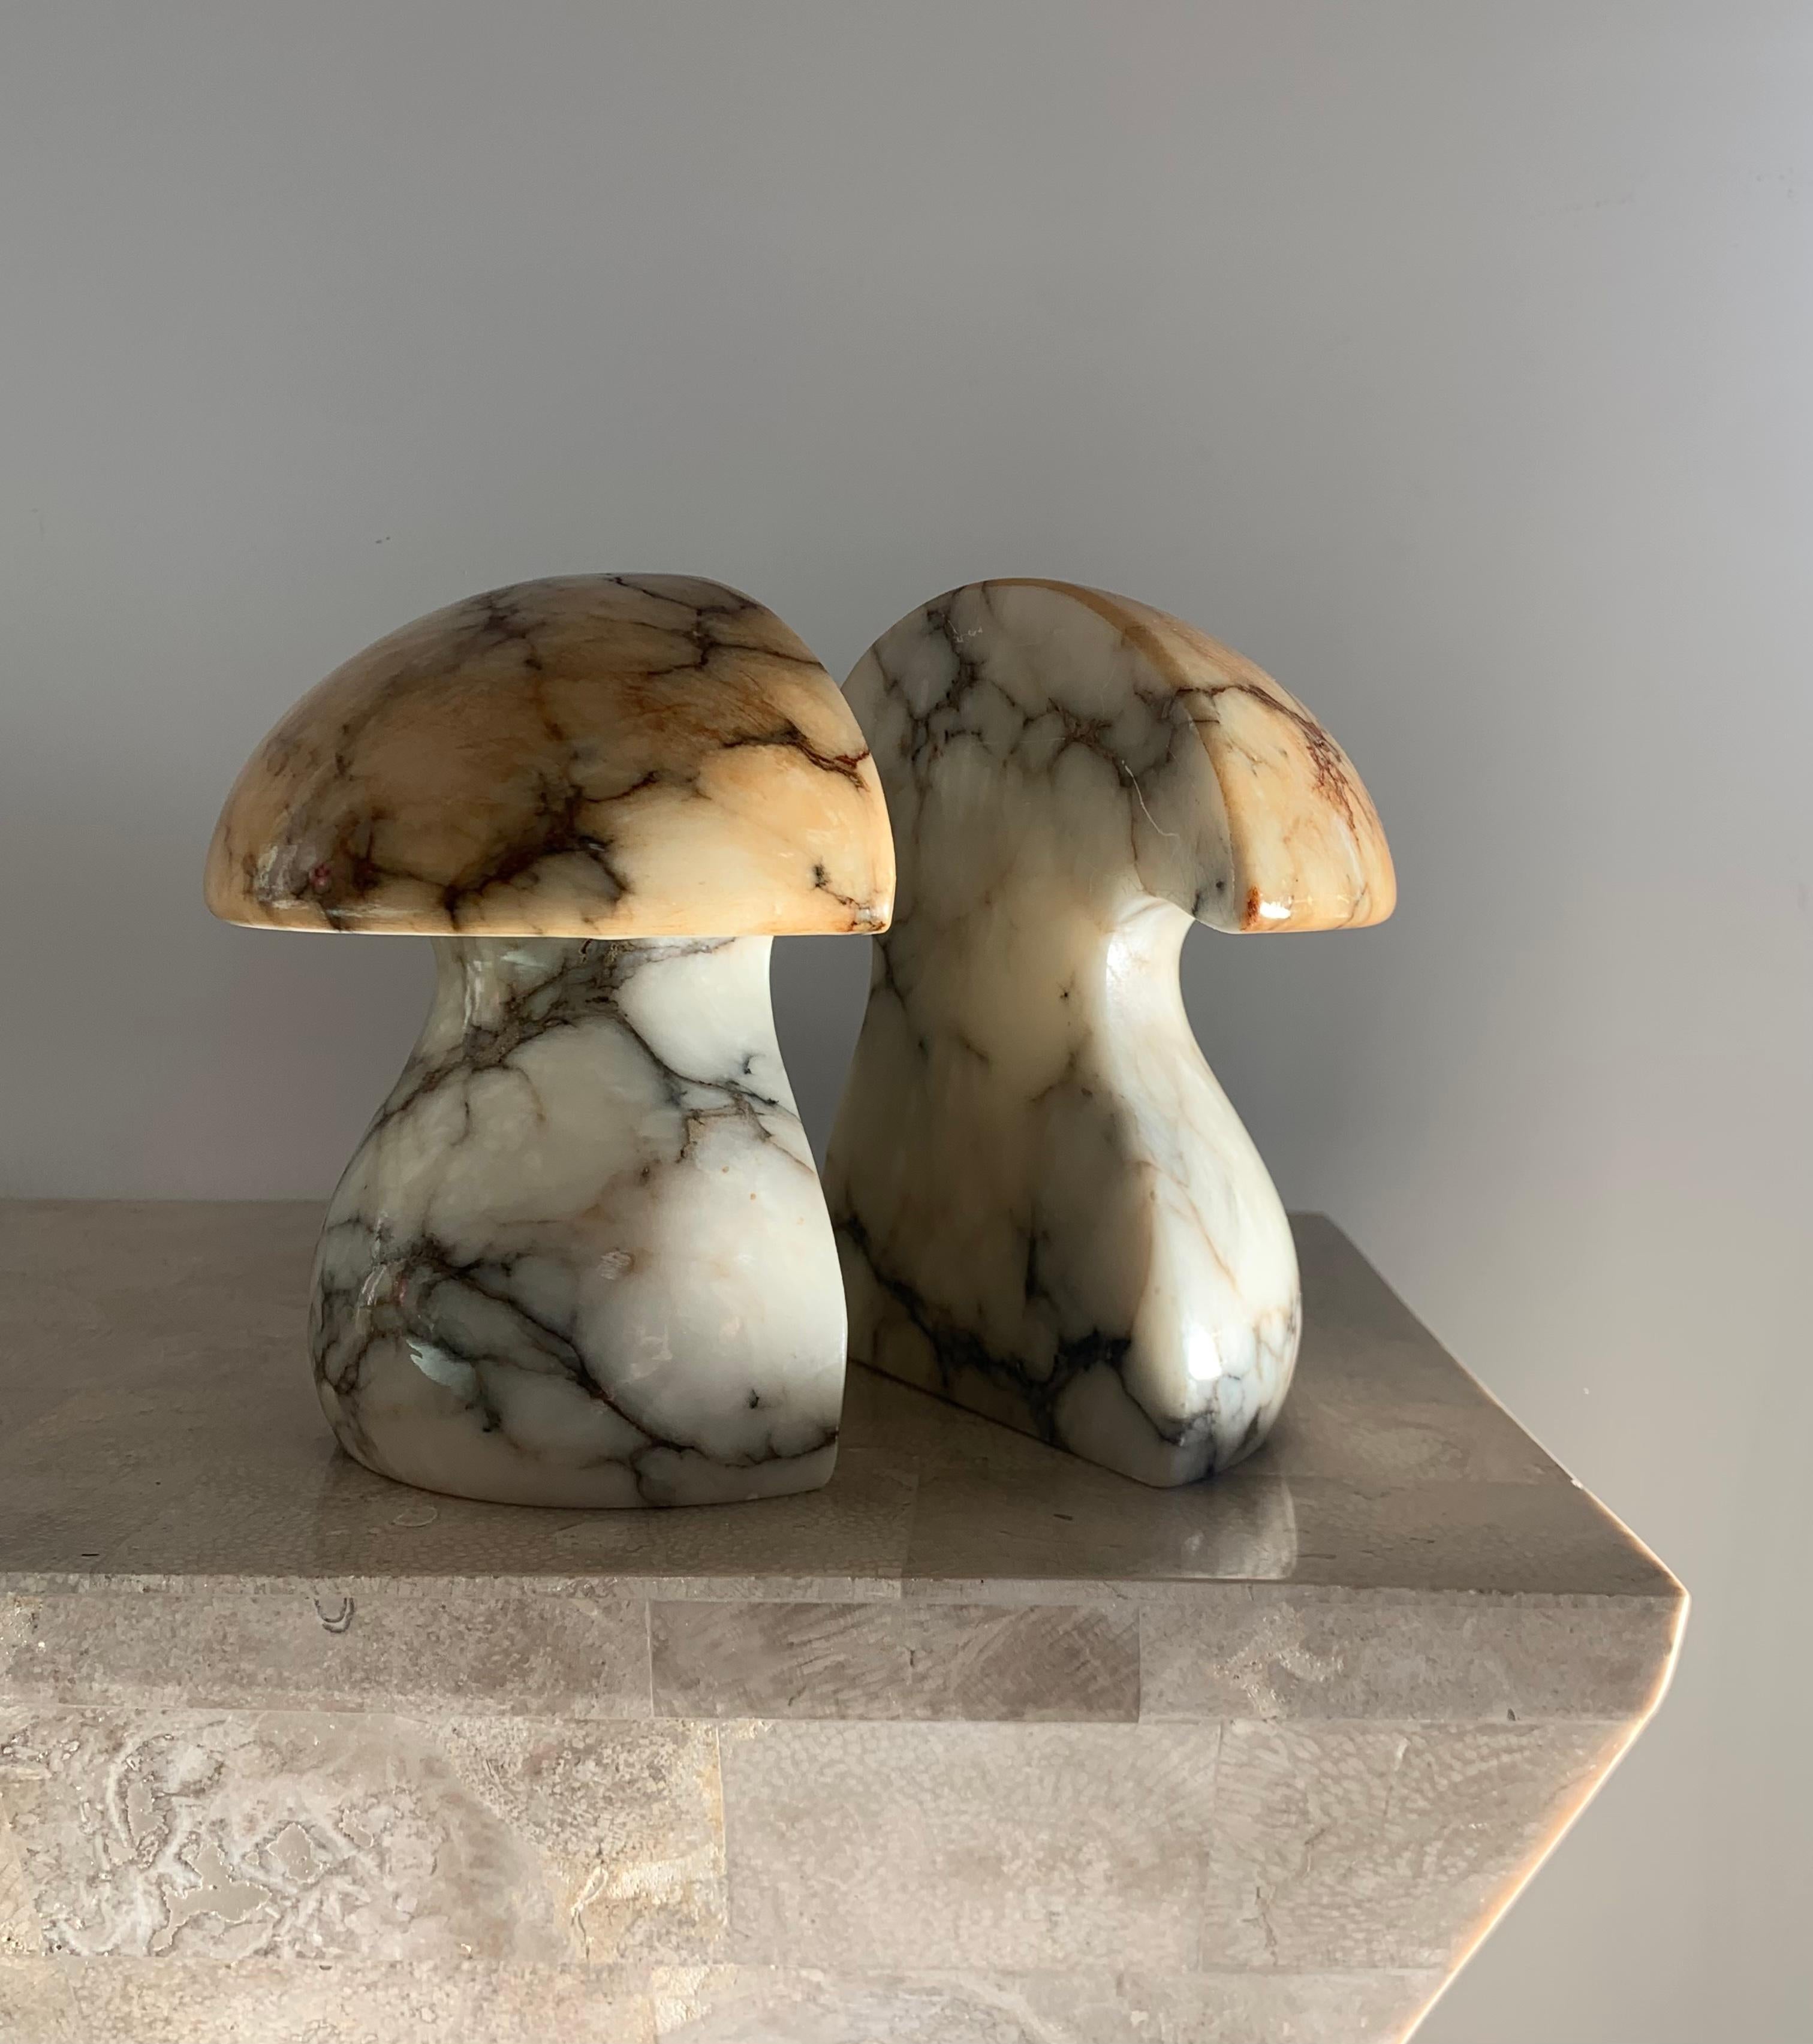 ABF marble mushroom bookends, 1960s. Curvy ivory stem with pale coral caps and ashen burgundy veining throughout. A blemish on one of the bookends reveals a minor loss that has been repaired; otherwise fabulous condition with petit signs of age. A